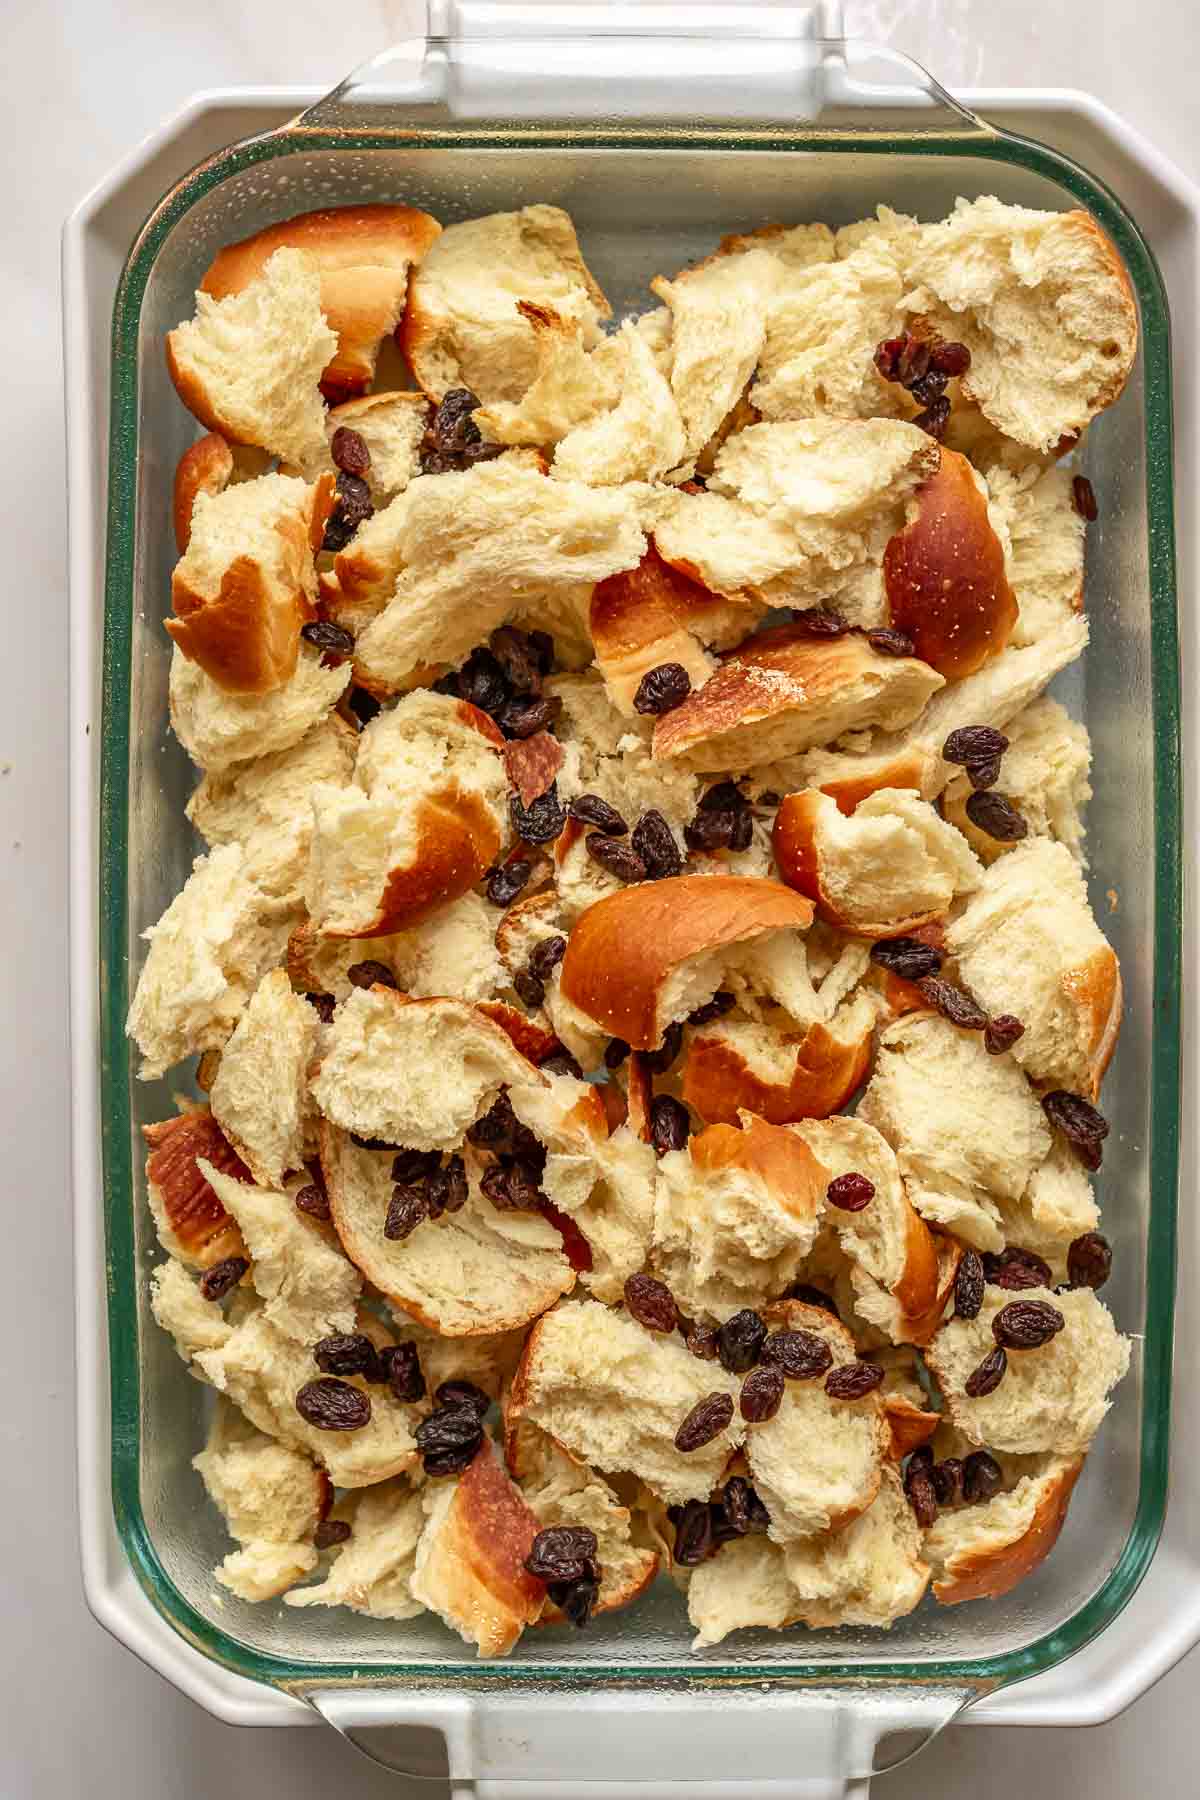 Raising and challah bread pieces in a casserole dish.